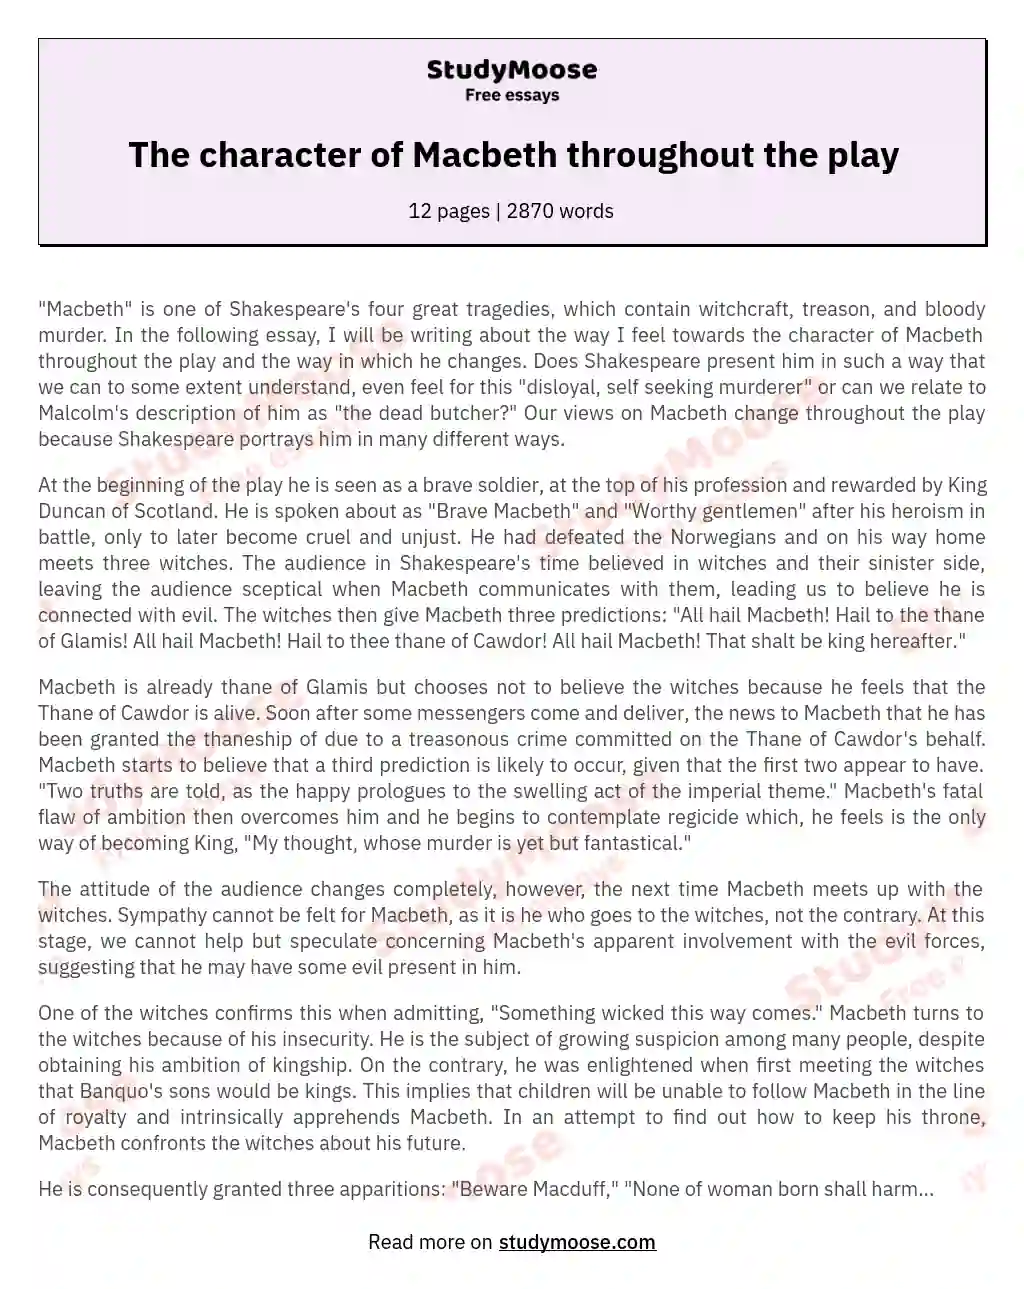 The character of Macbeth throughout the play